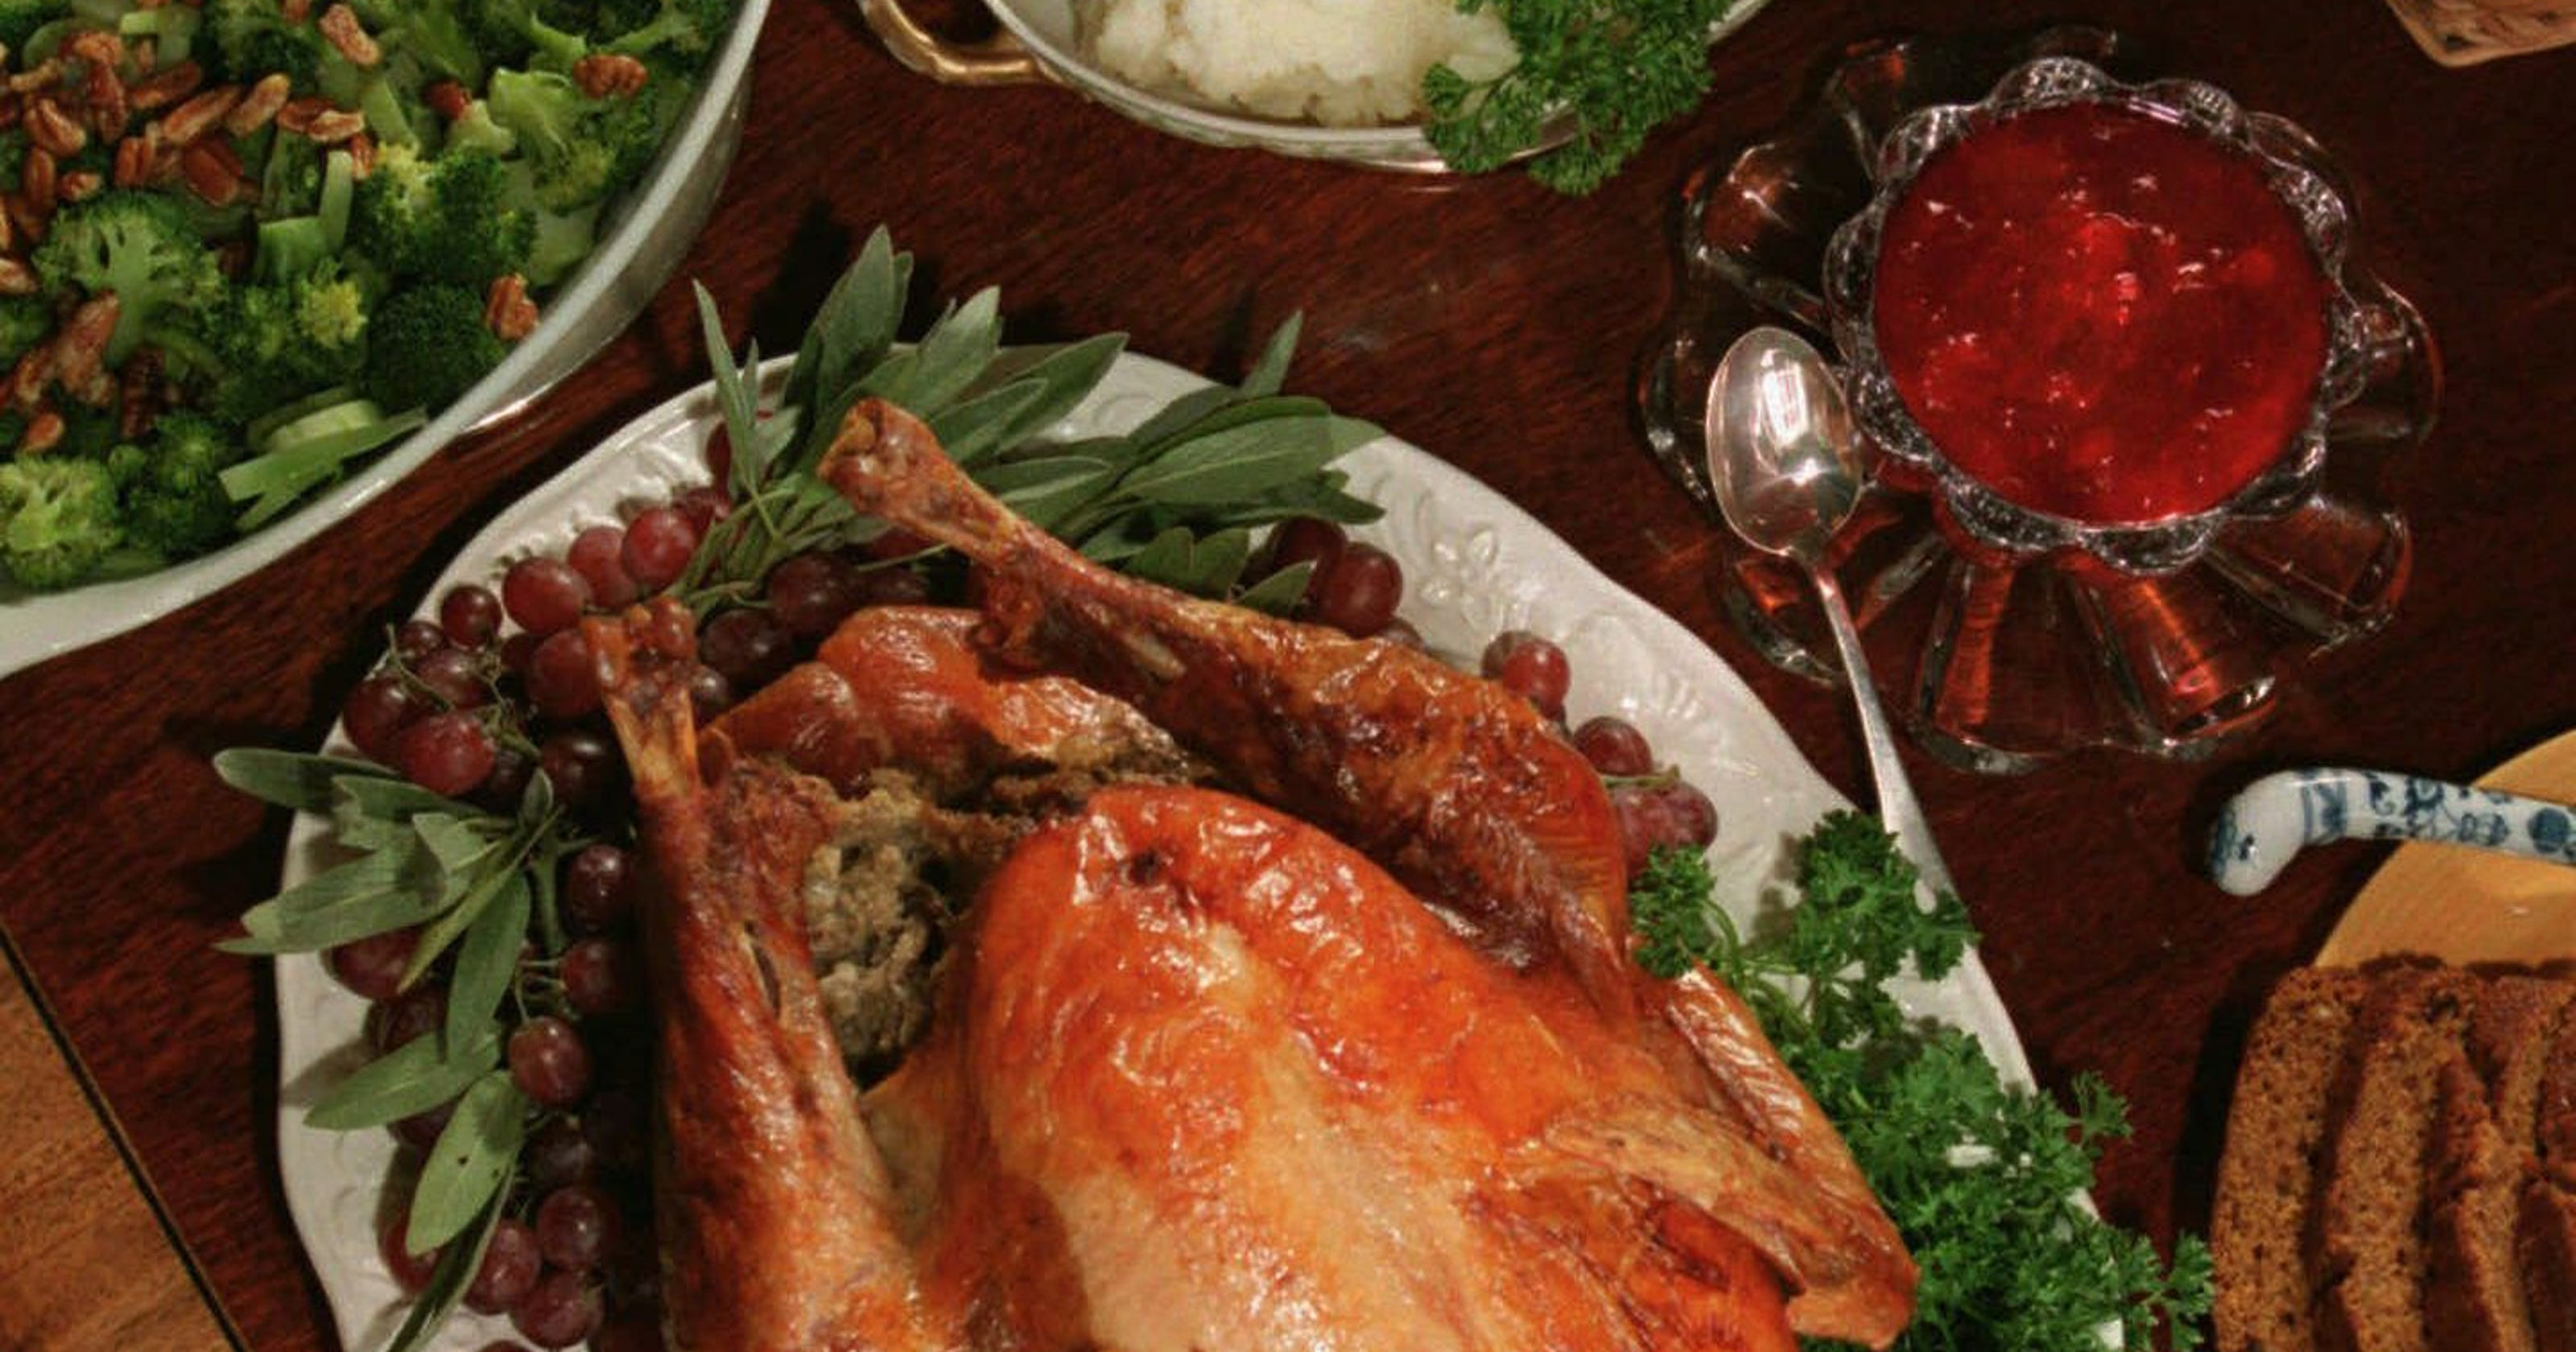 30 Best Ideas Giant Thanksgiving Dinners Most Popular Ideas of All Time